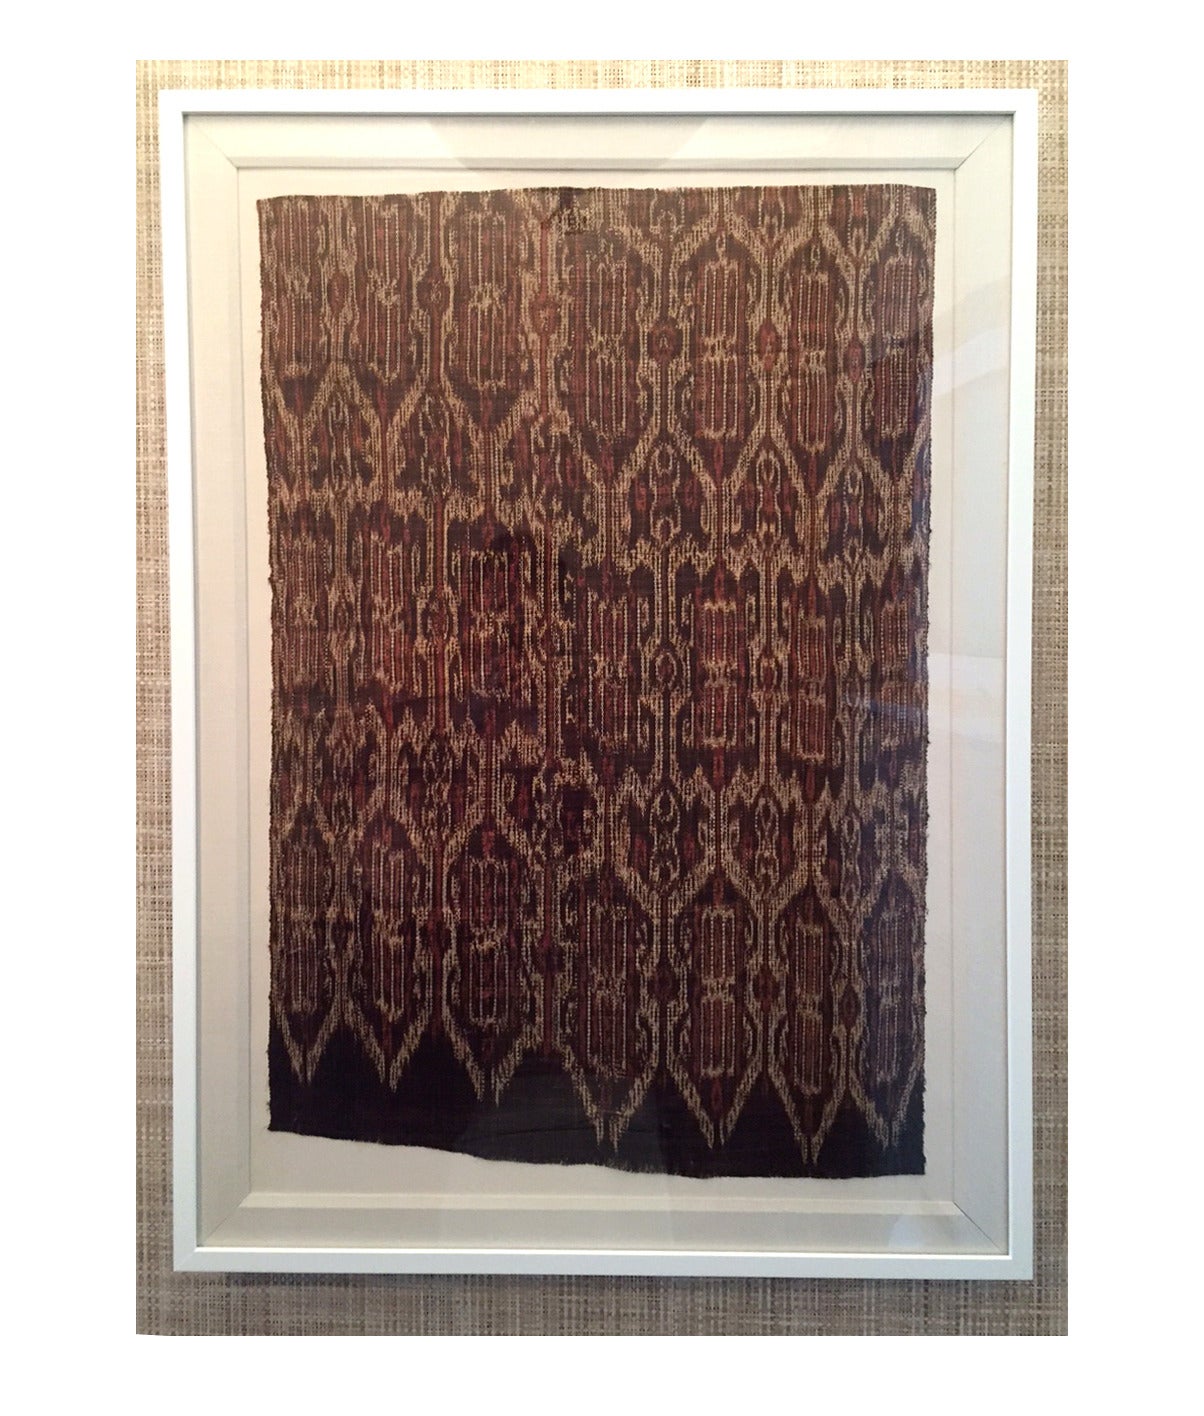 An antique segment of woven Ikat textile panel from Philippines, circa early 20th century perhaps earlier. This traditional weave is called T'nalak and it is found in Mindanao island by a group of people in Lake Sebu, South Cotabato called T'bolis.